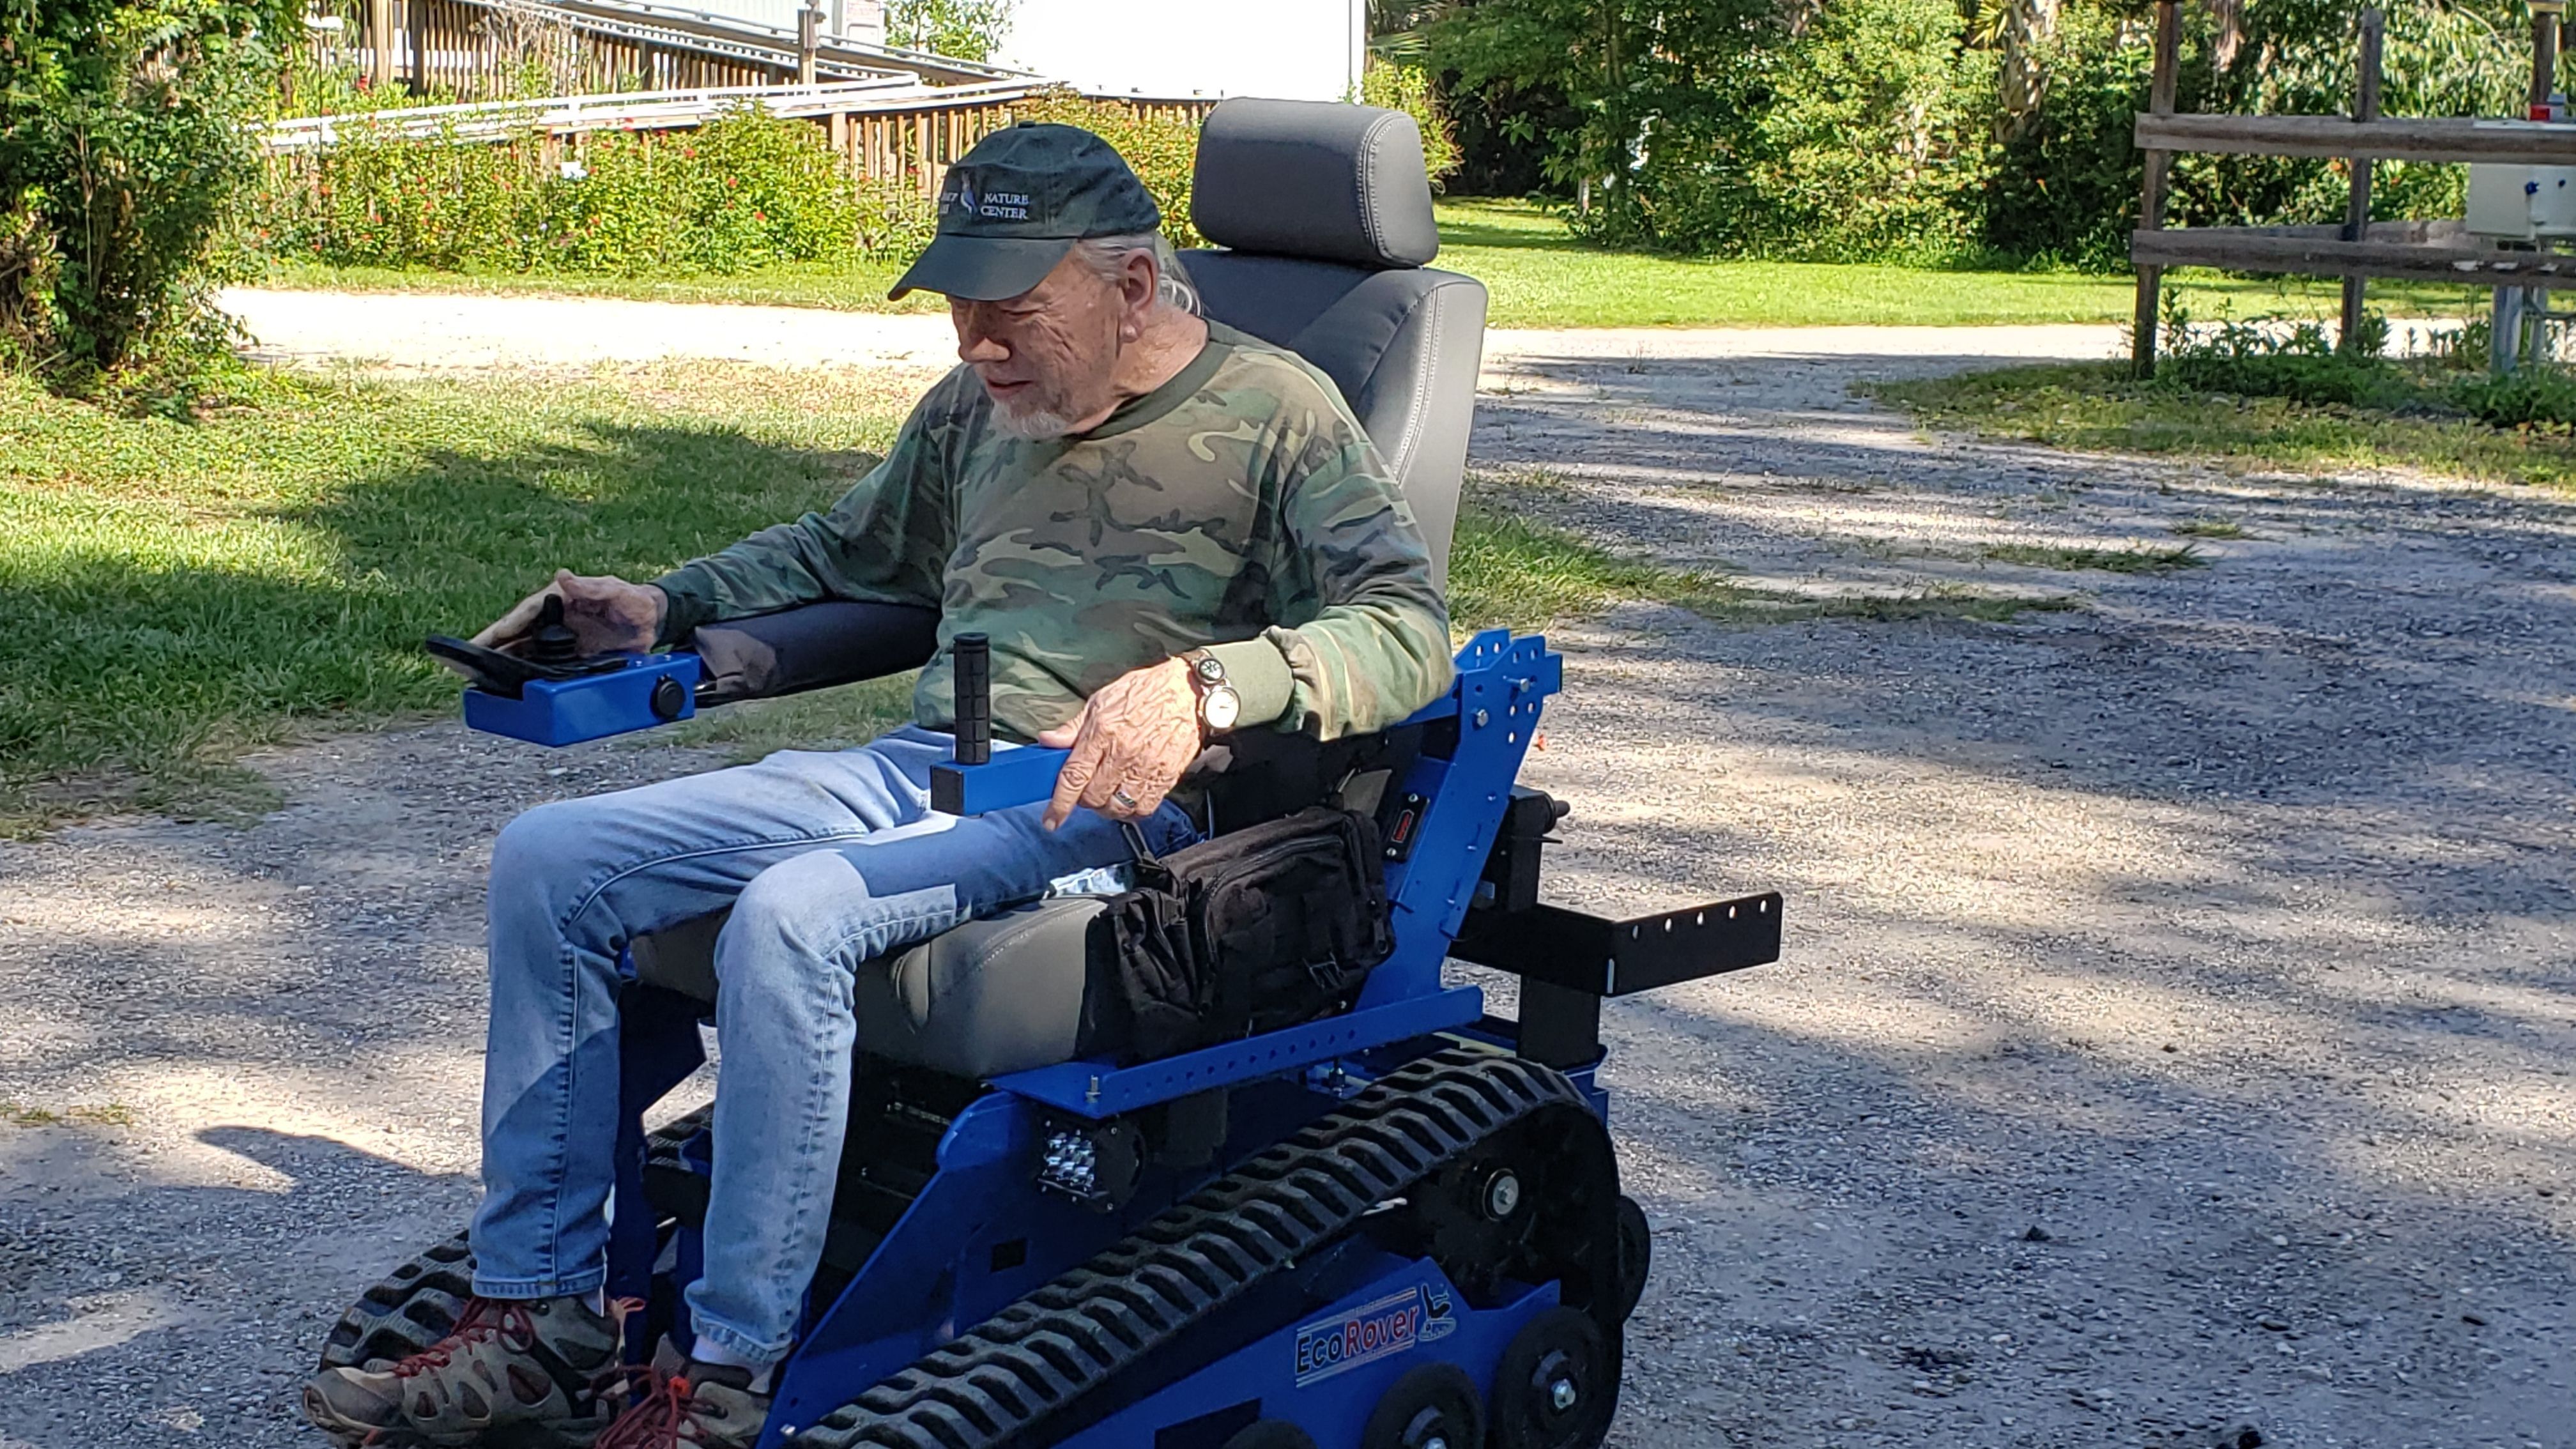 An older gentleman dressed in blue jean, camo shirt and ball cap is sitting in the blue EcoRover chair with joy stick in hand and tracks for wheels. 